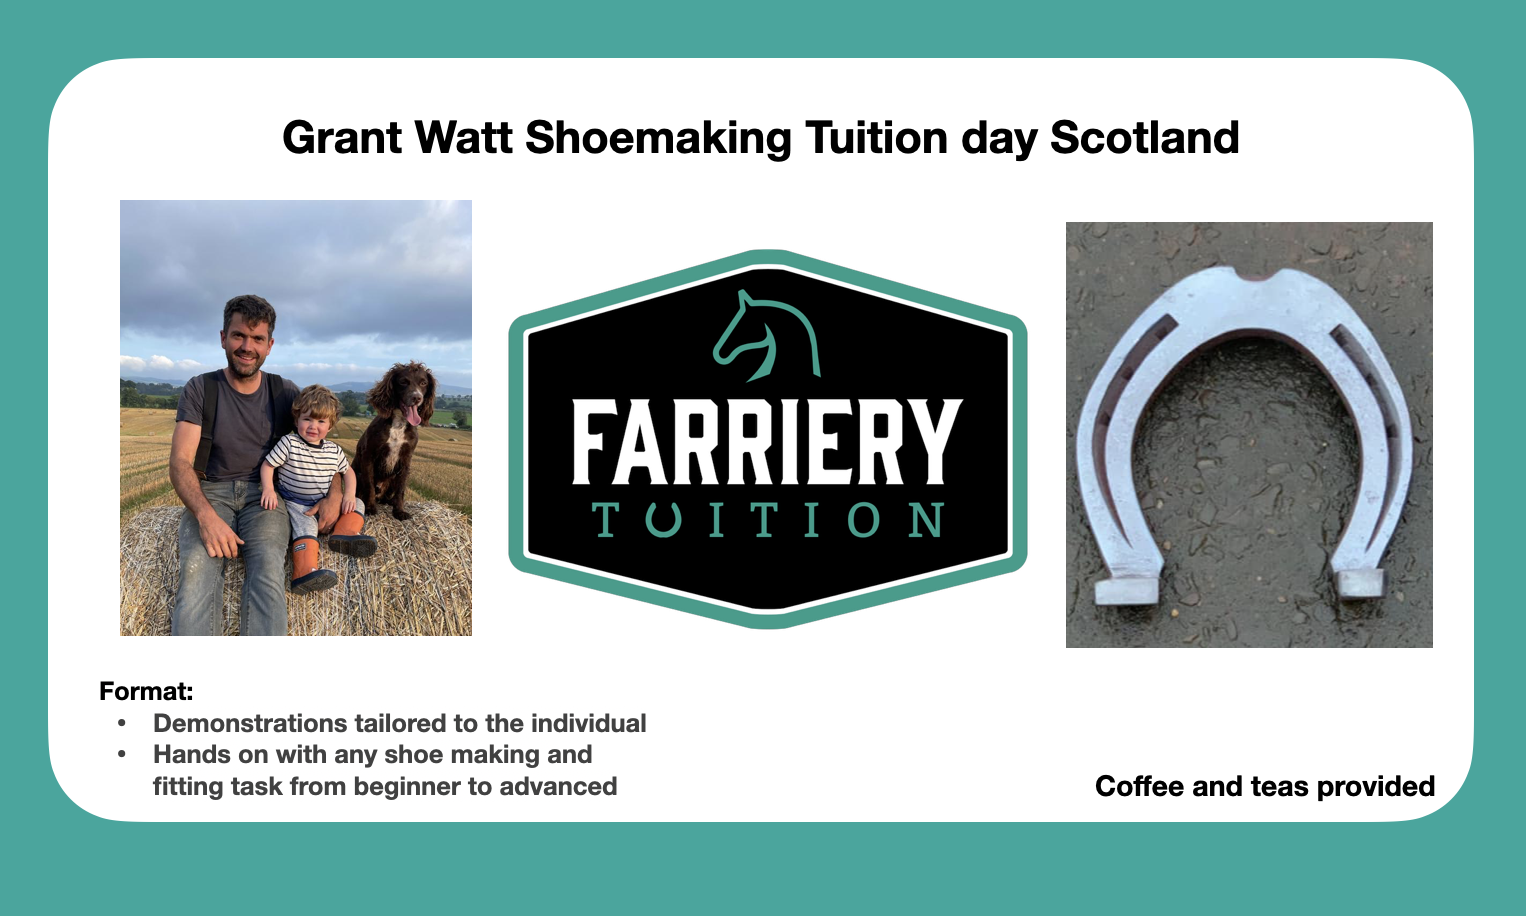                          Grant Watt Shoemaking and Shoeing Tuition Day 